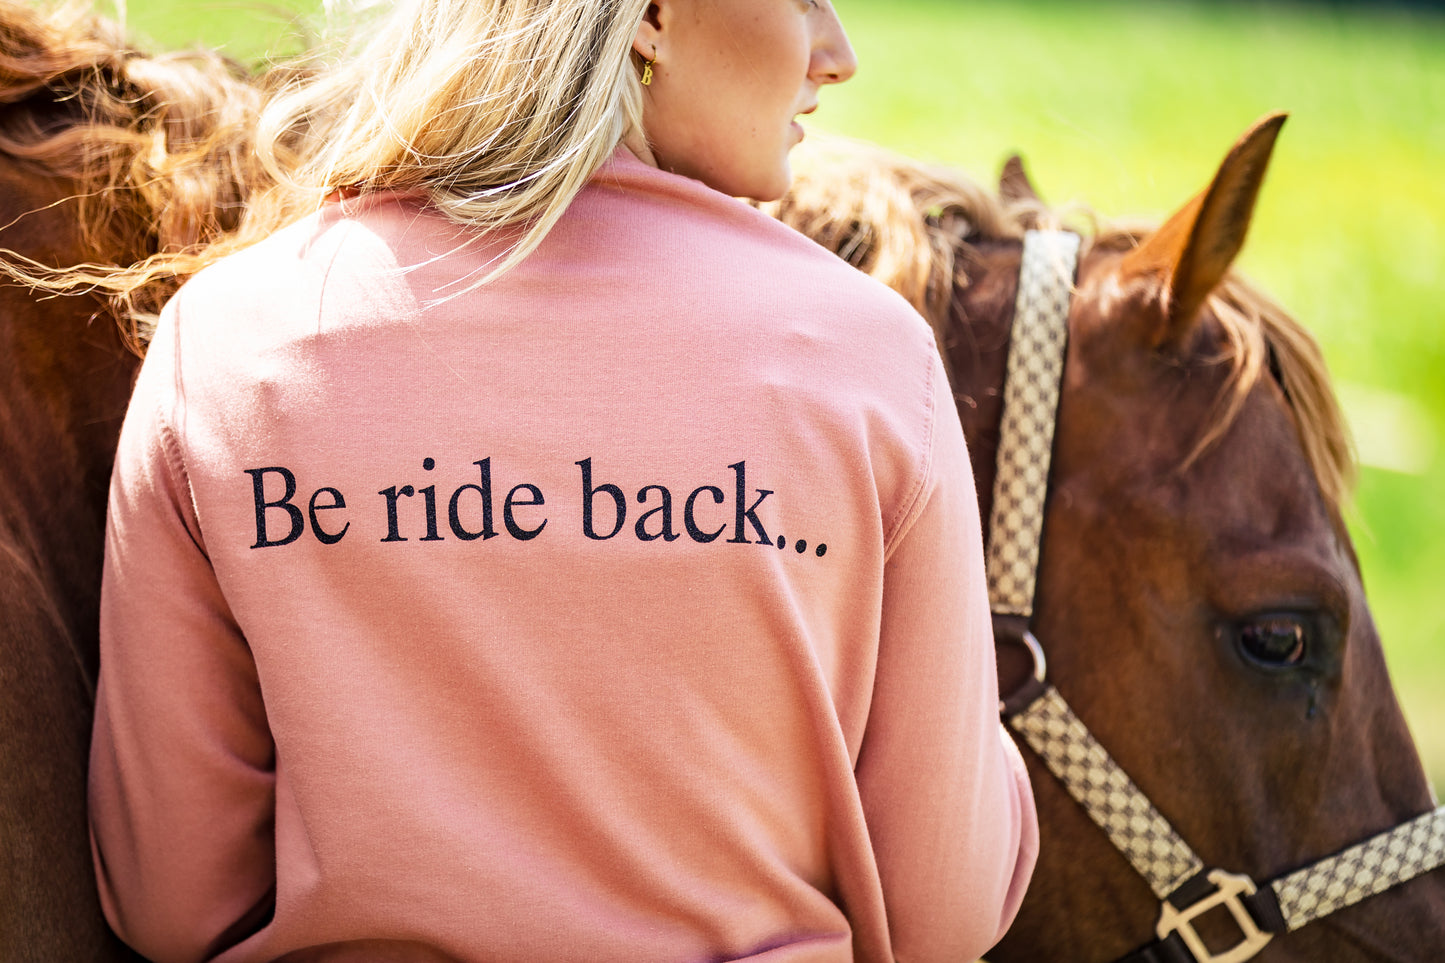 Sweater Be ride back dusty rose